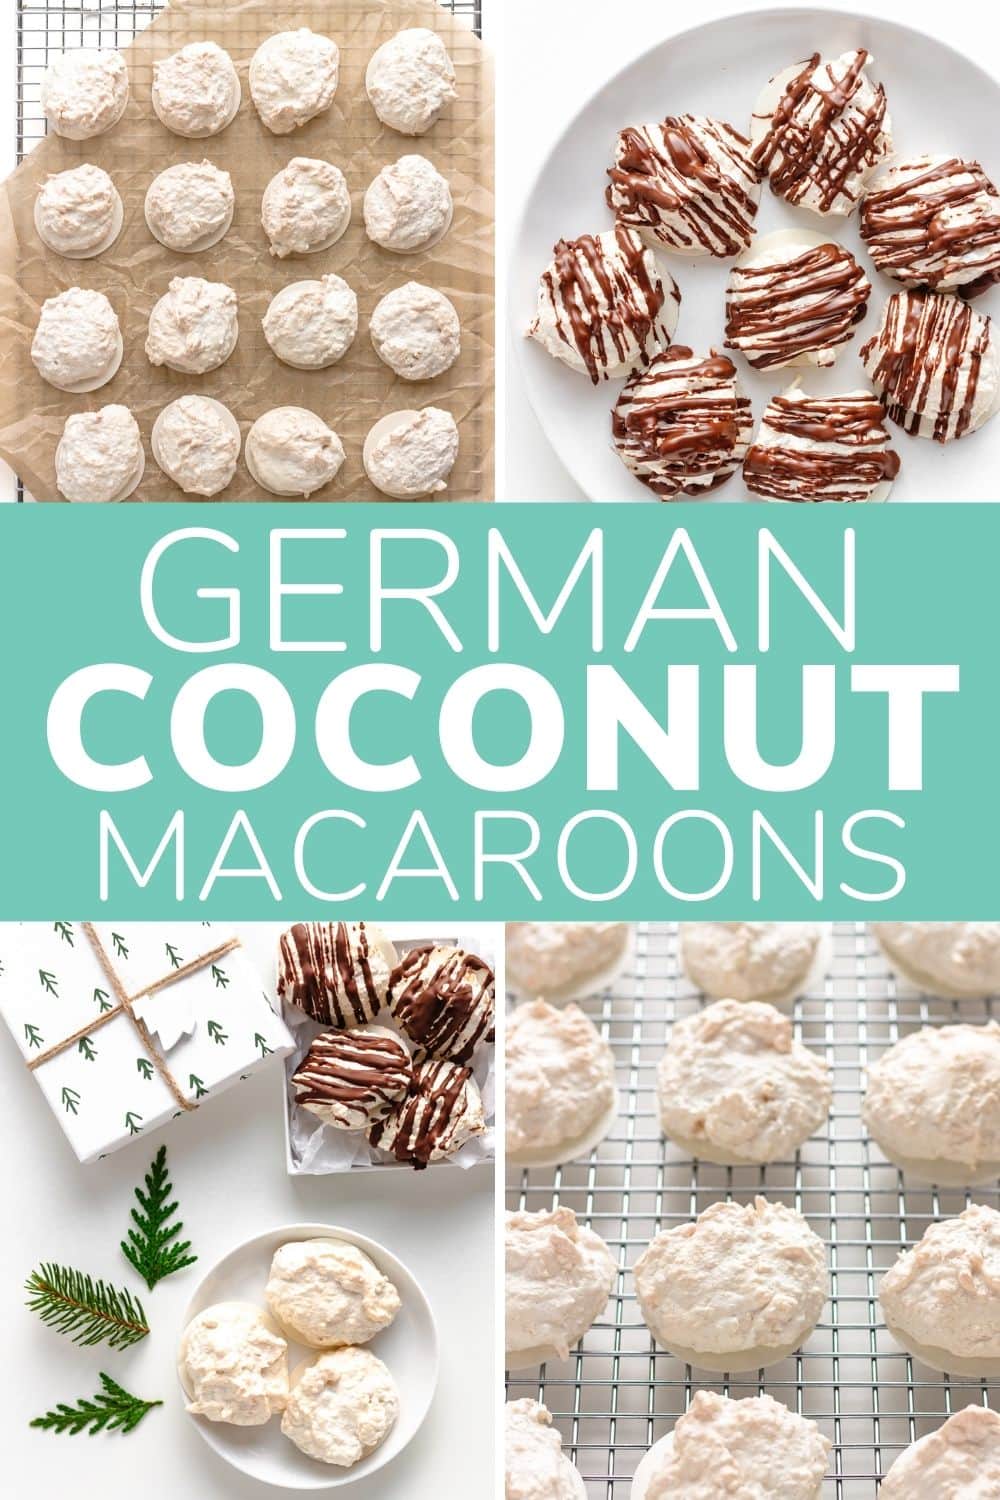 Photo collage graphic of coconut macaroons with text overlay "German Coconut Macaroons".